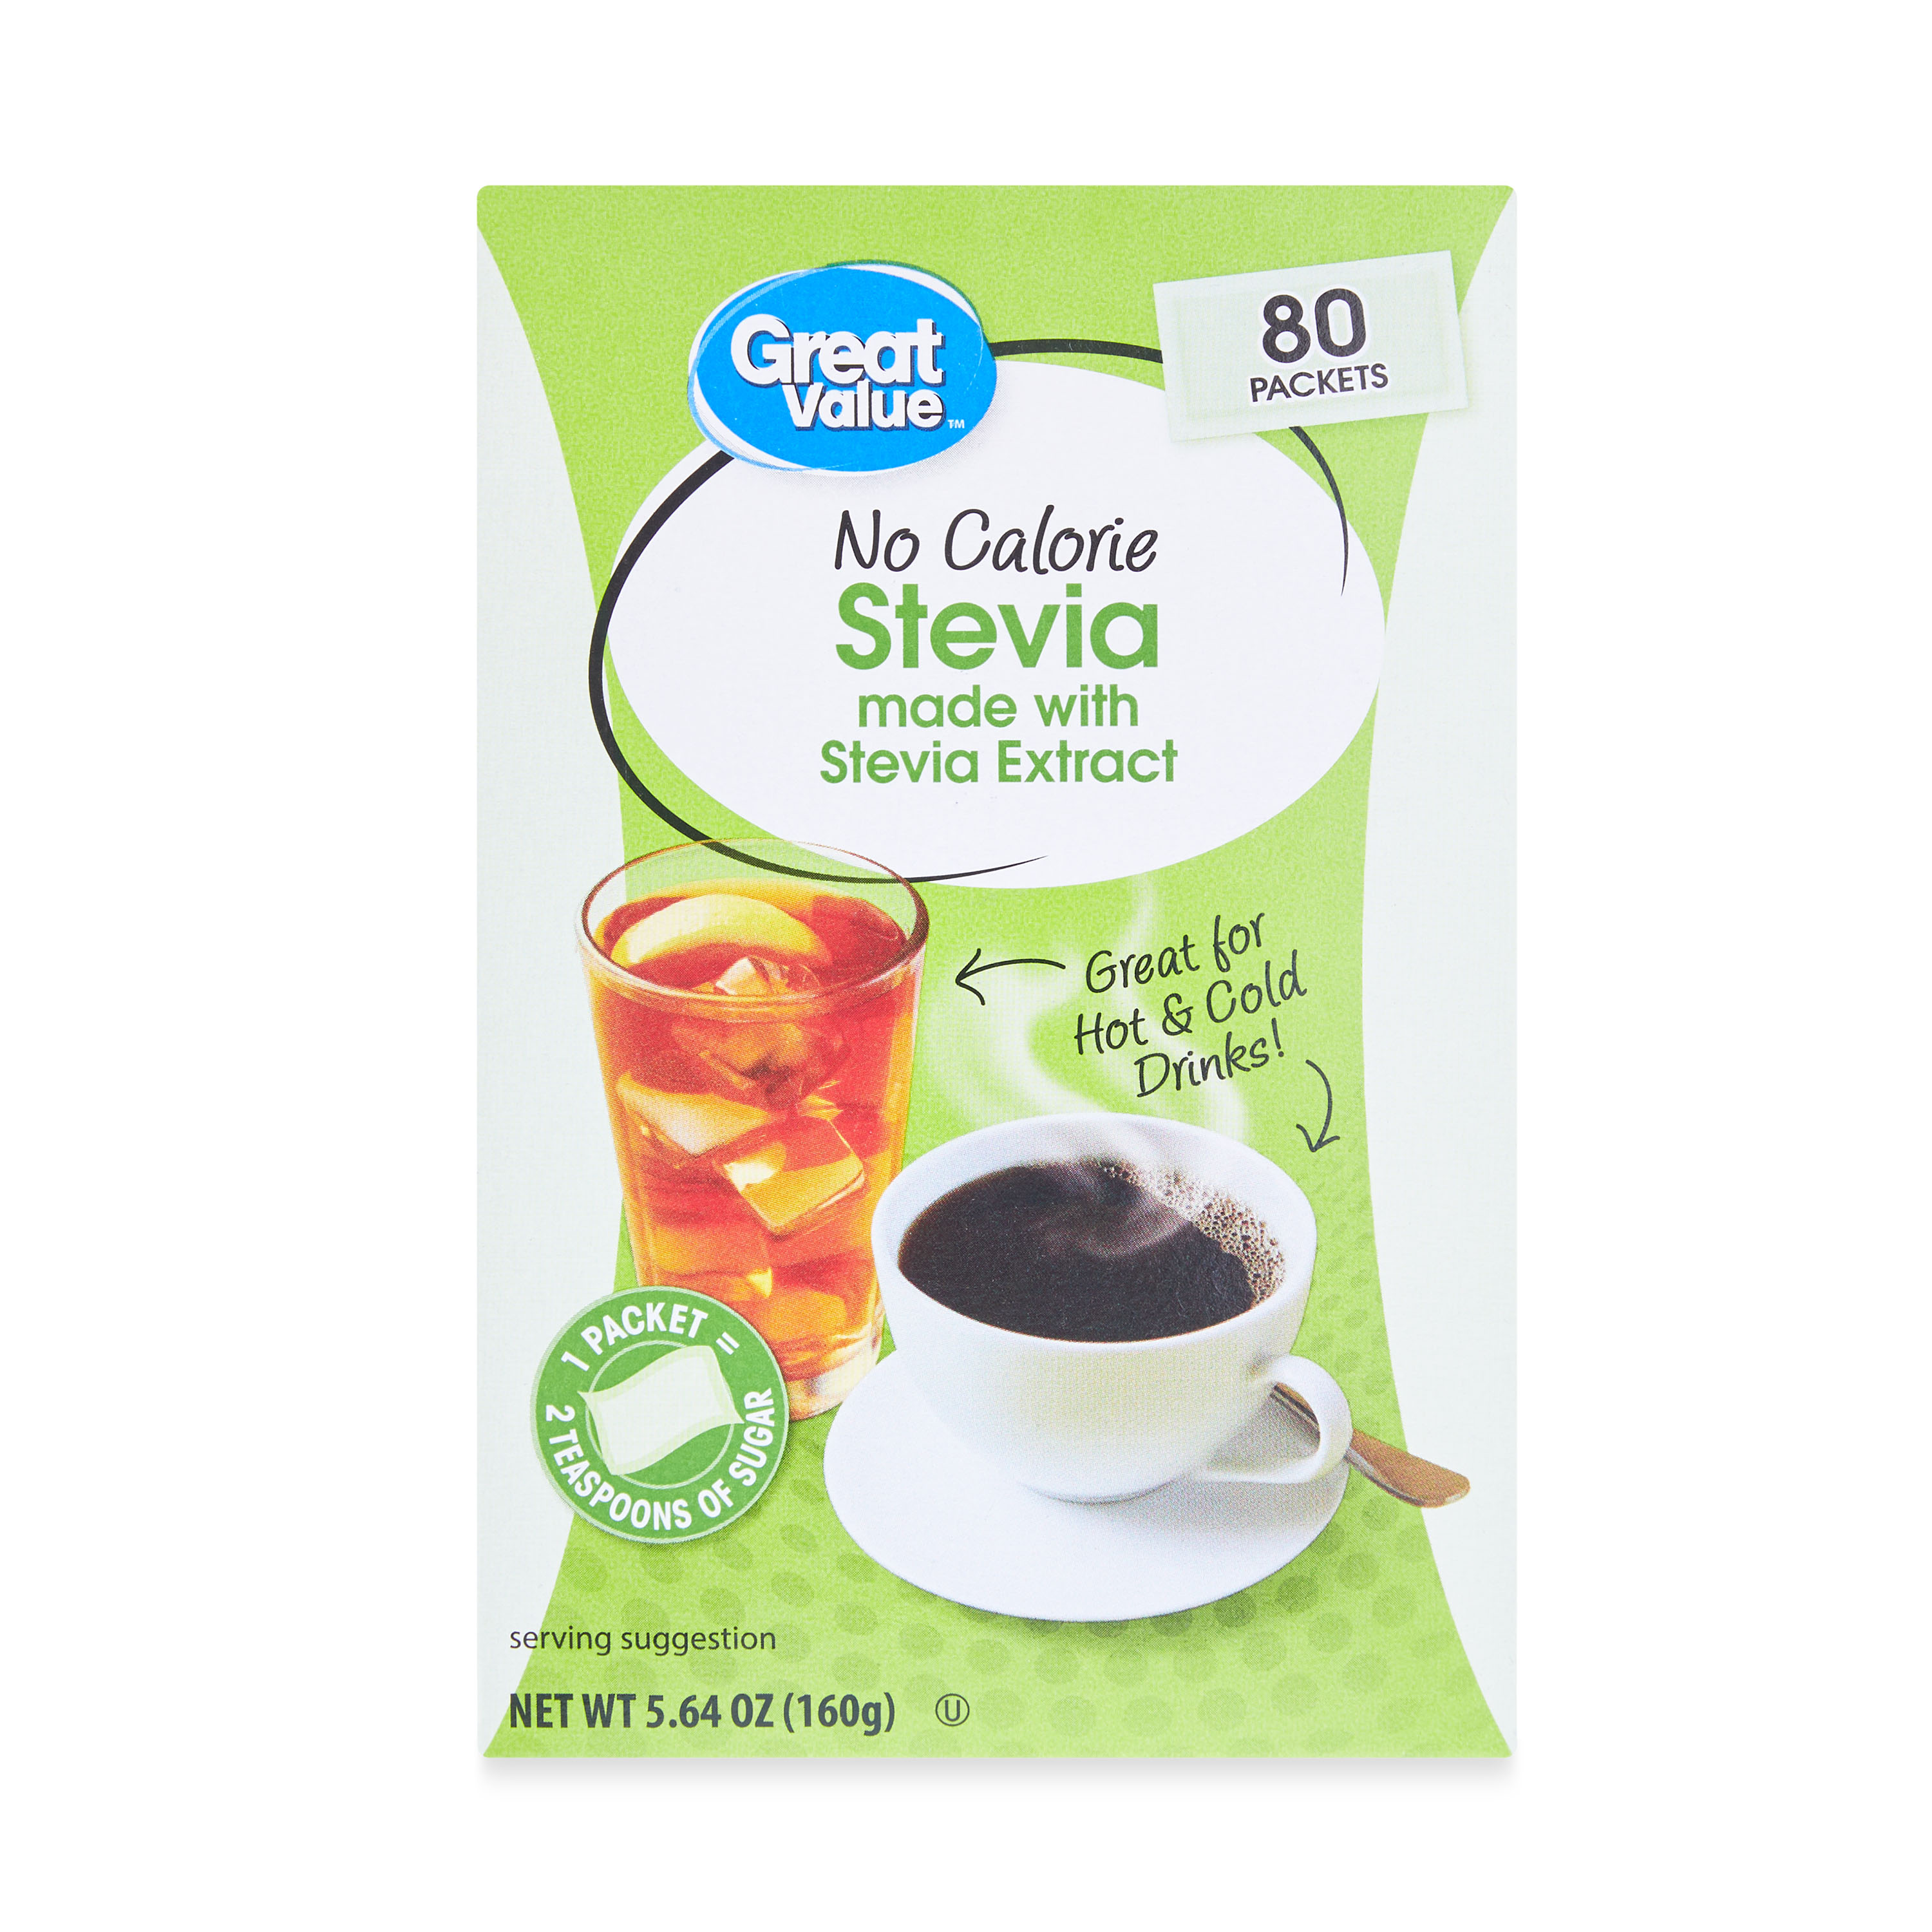 Great Value No Calorie Stevia Packets, 80 Count - image 1 of 8